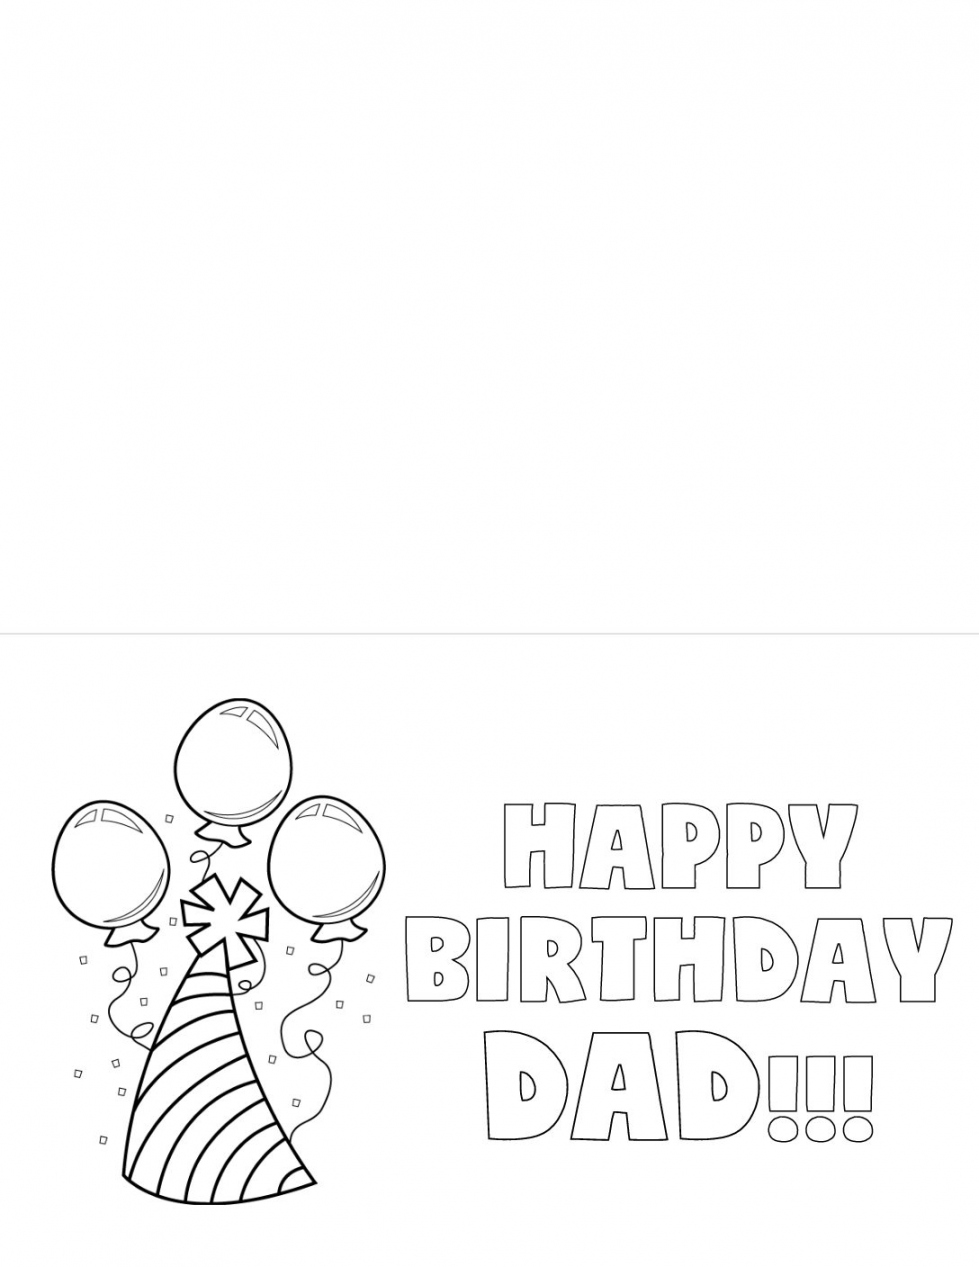 Free Printable Birthday Card (Dad) - Six Clever Sisters - FREE Printables - Free Printable Birthday Card For Dad